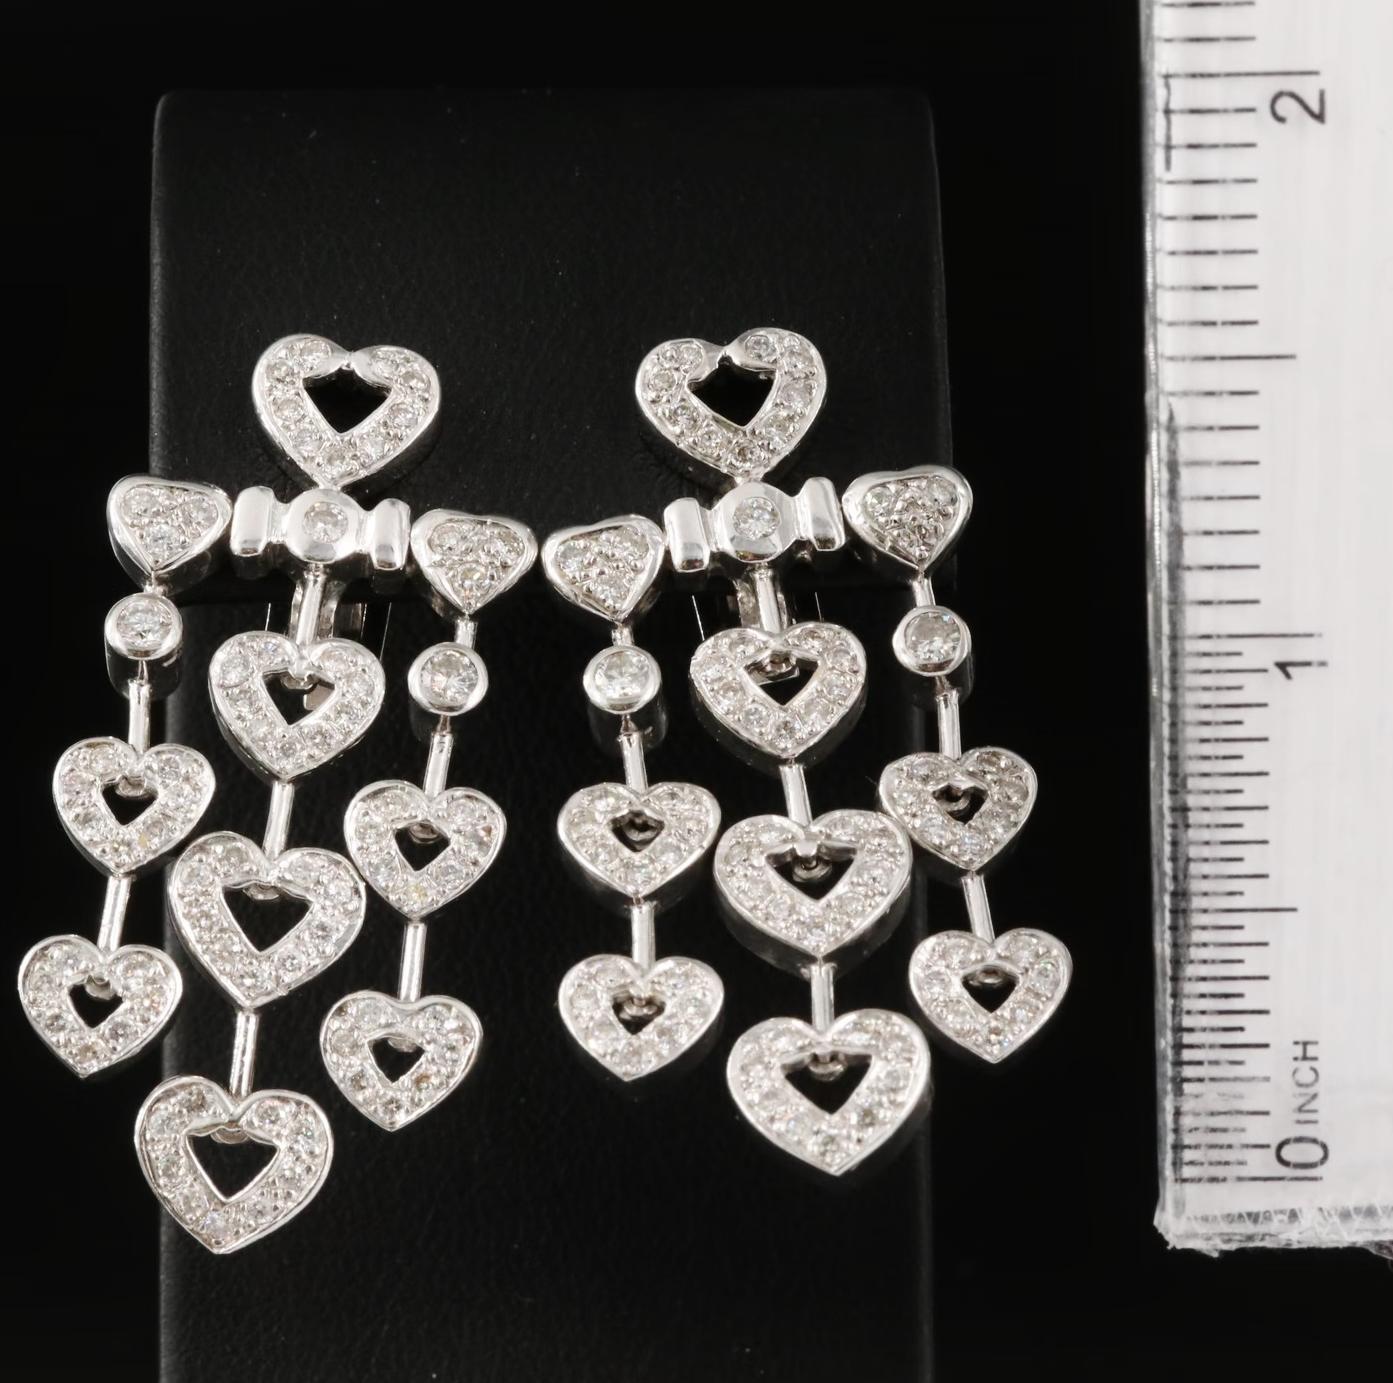 Round Cut $9500 / New / Italy / 2.65 Ct Diamond Hearts Love Earrings / 18K Gold 24.7 Grams For Sale